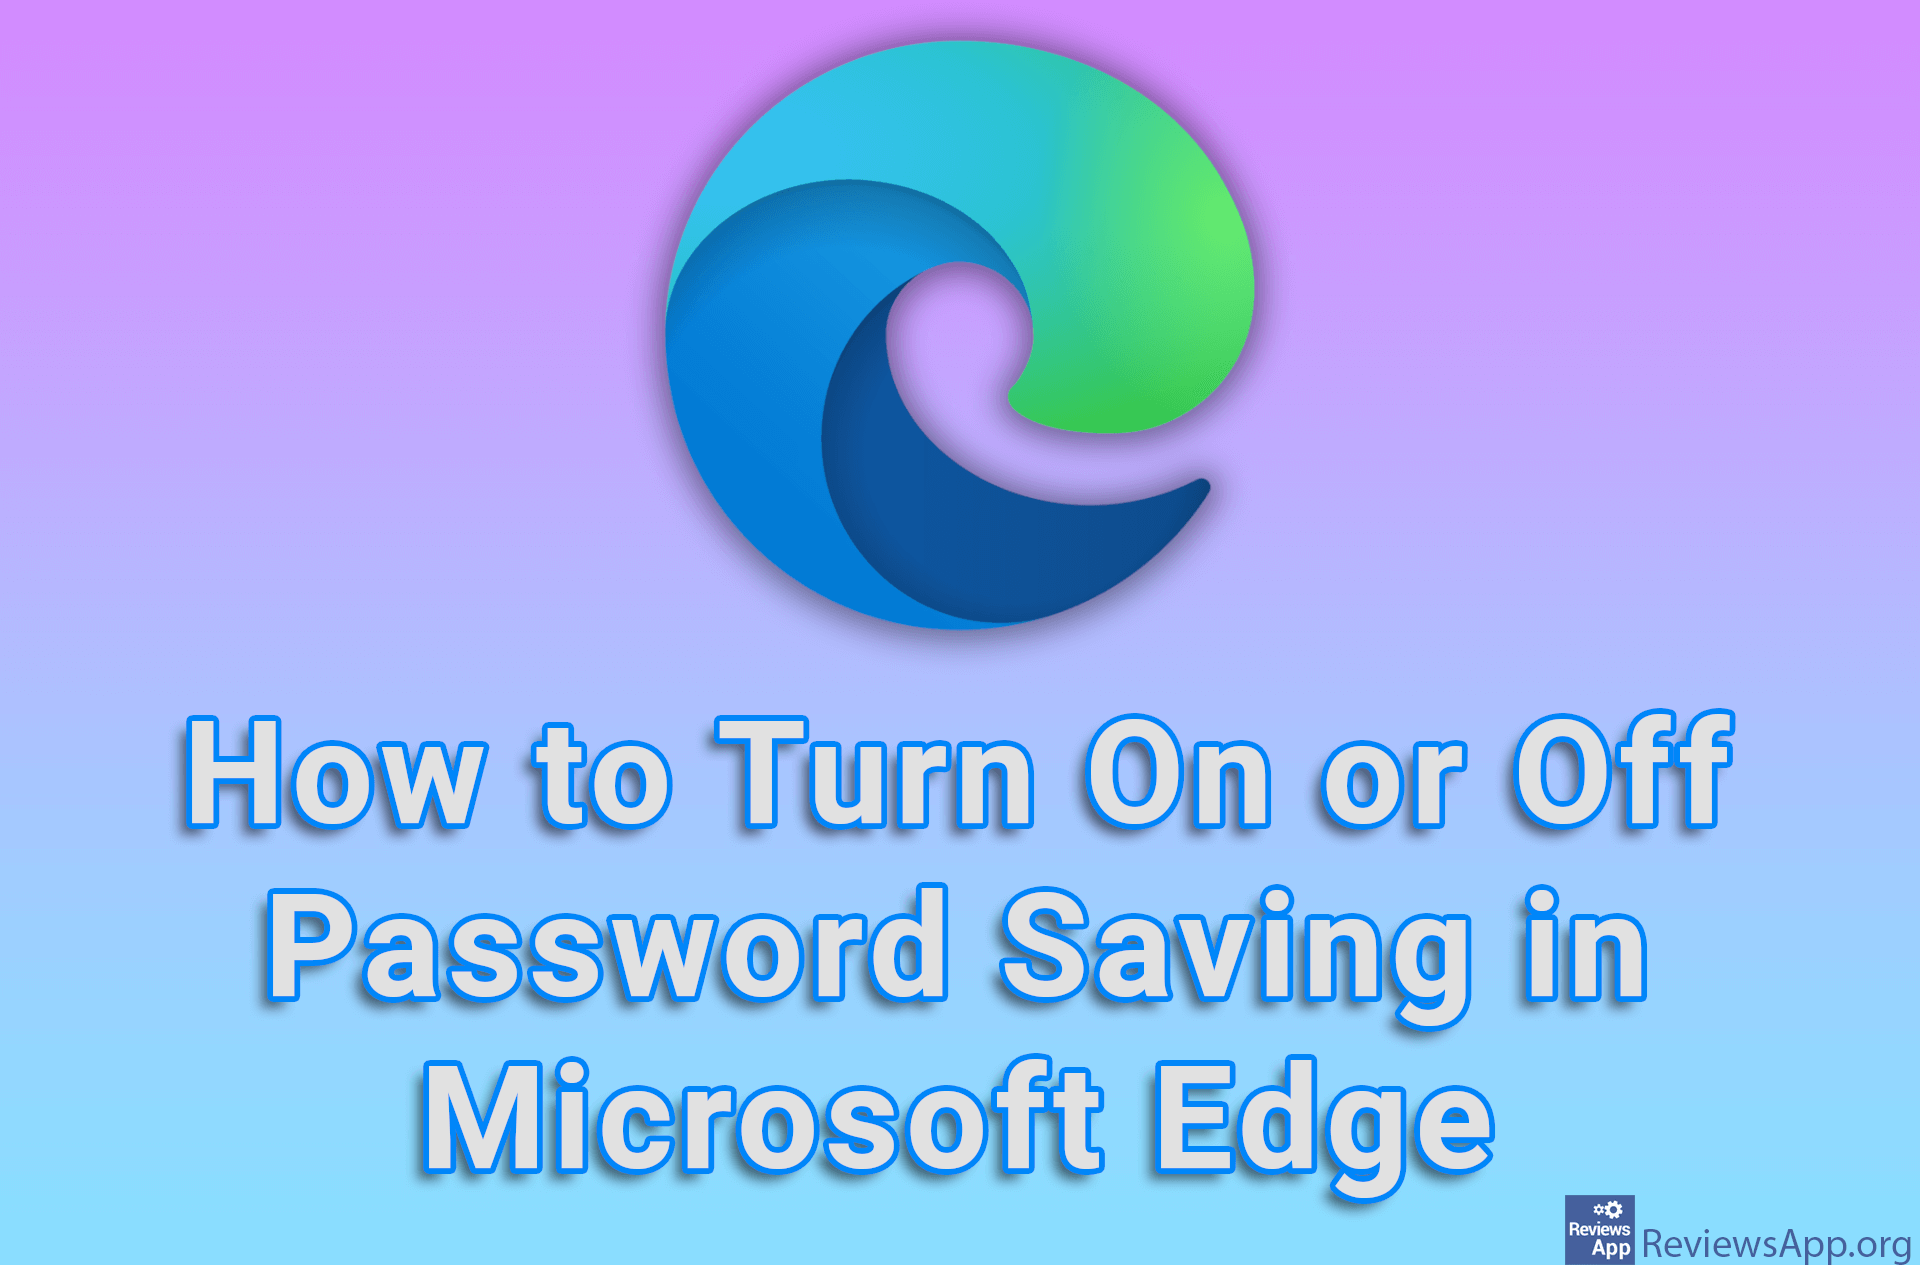 How to Turn On or Off Password Saving in Microsoft Edge